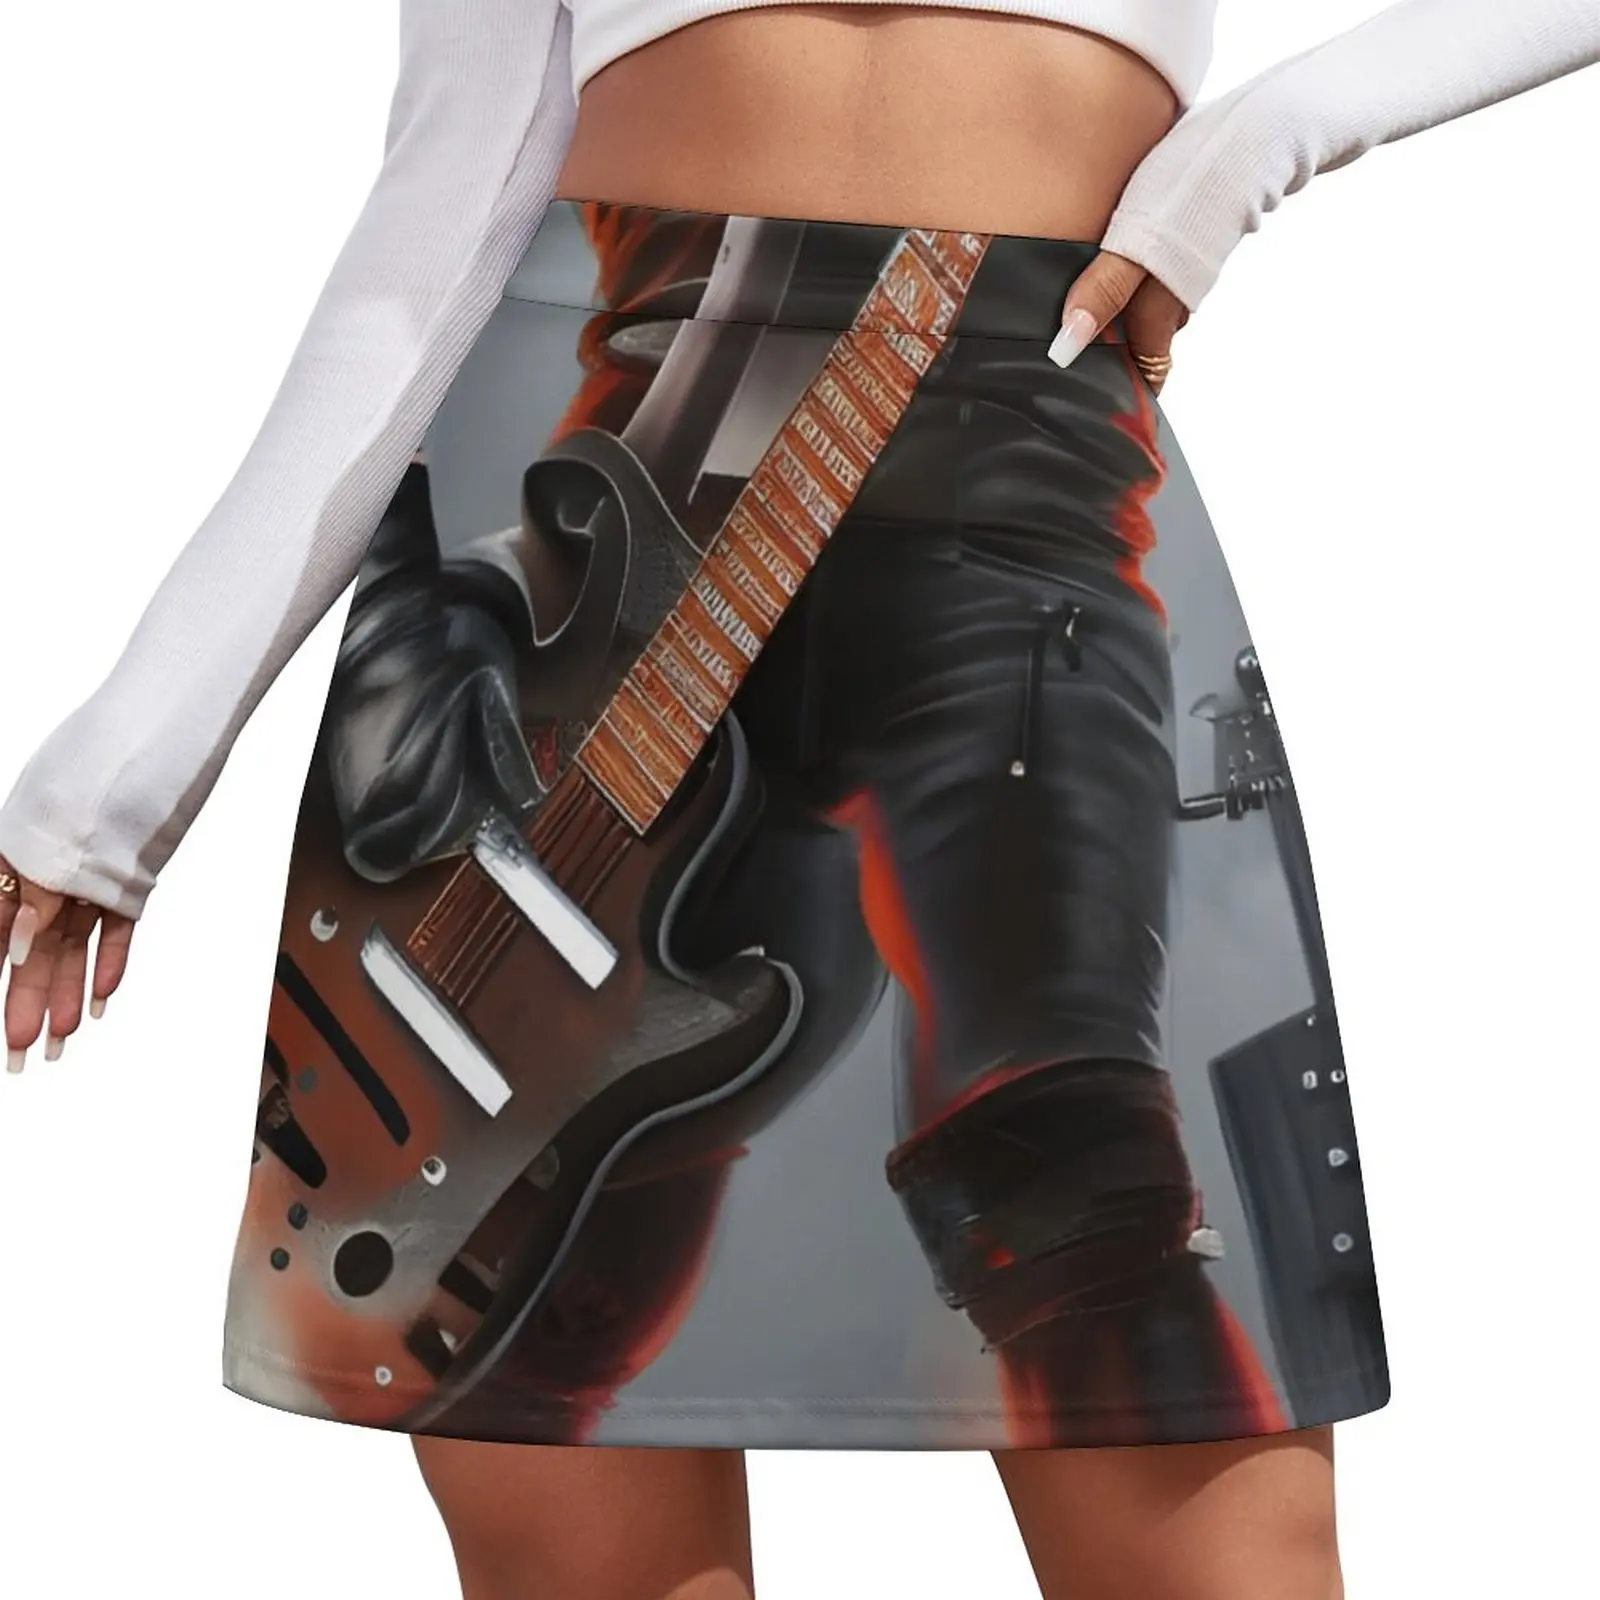 Metal Guitarist Mini Skirt korean style clothes Woman skirts clothes for woman